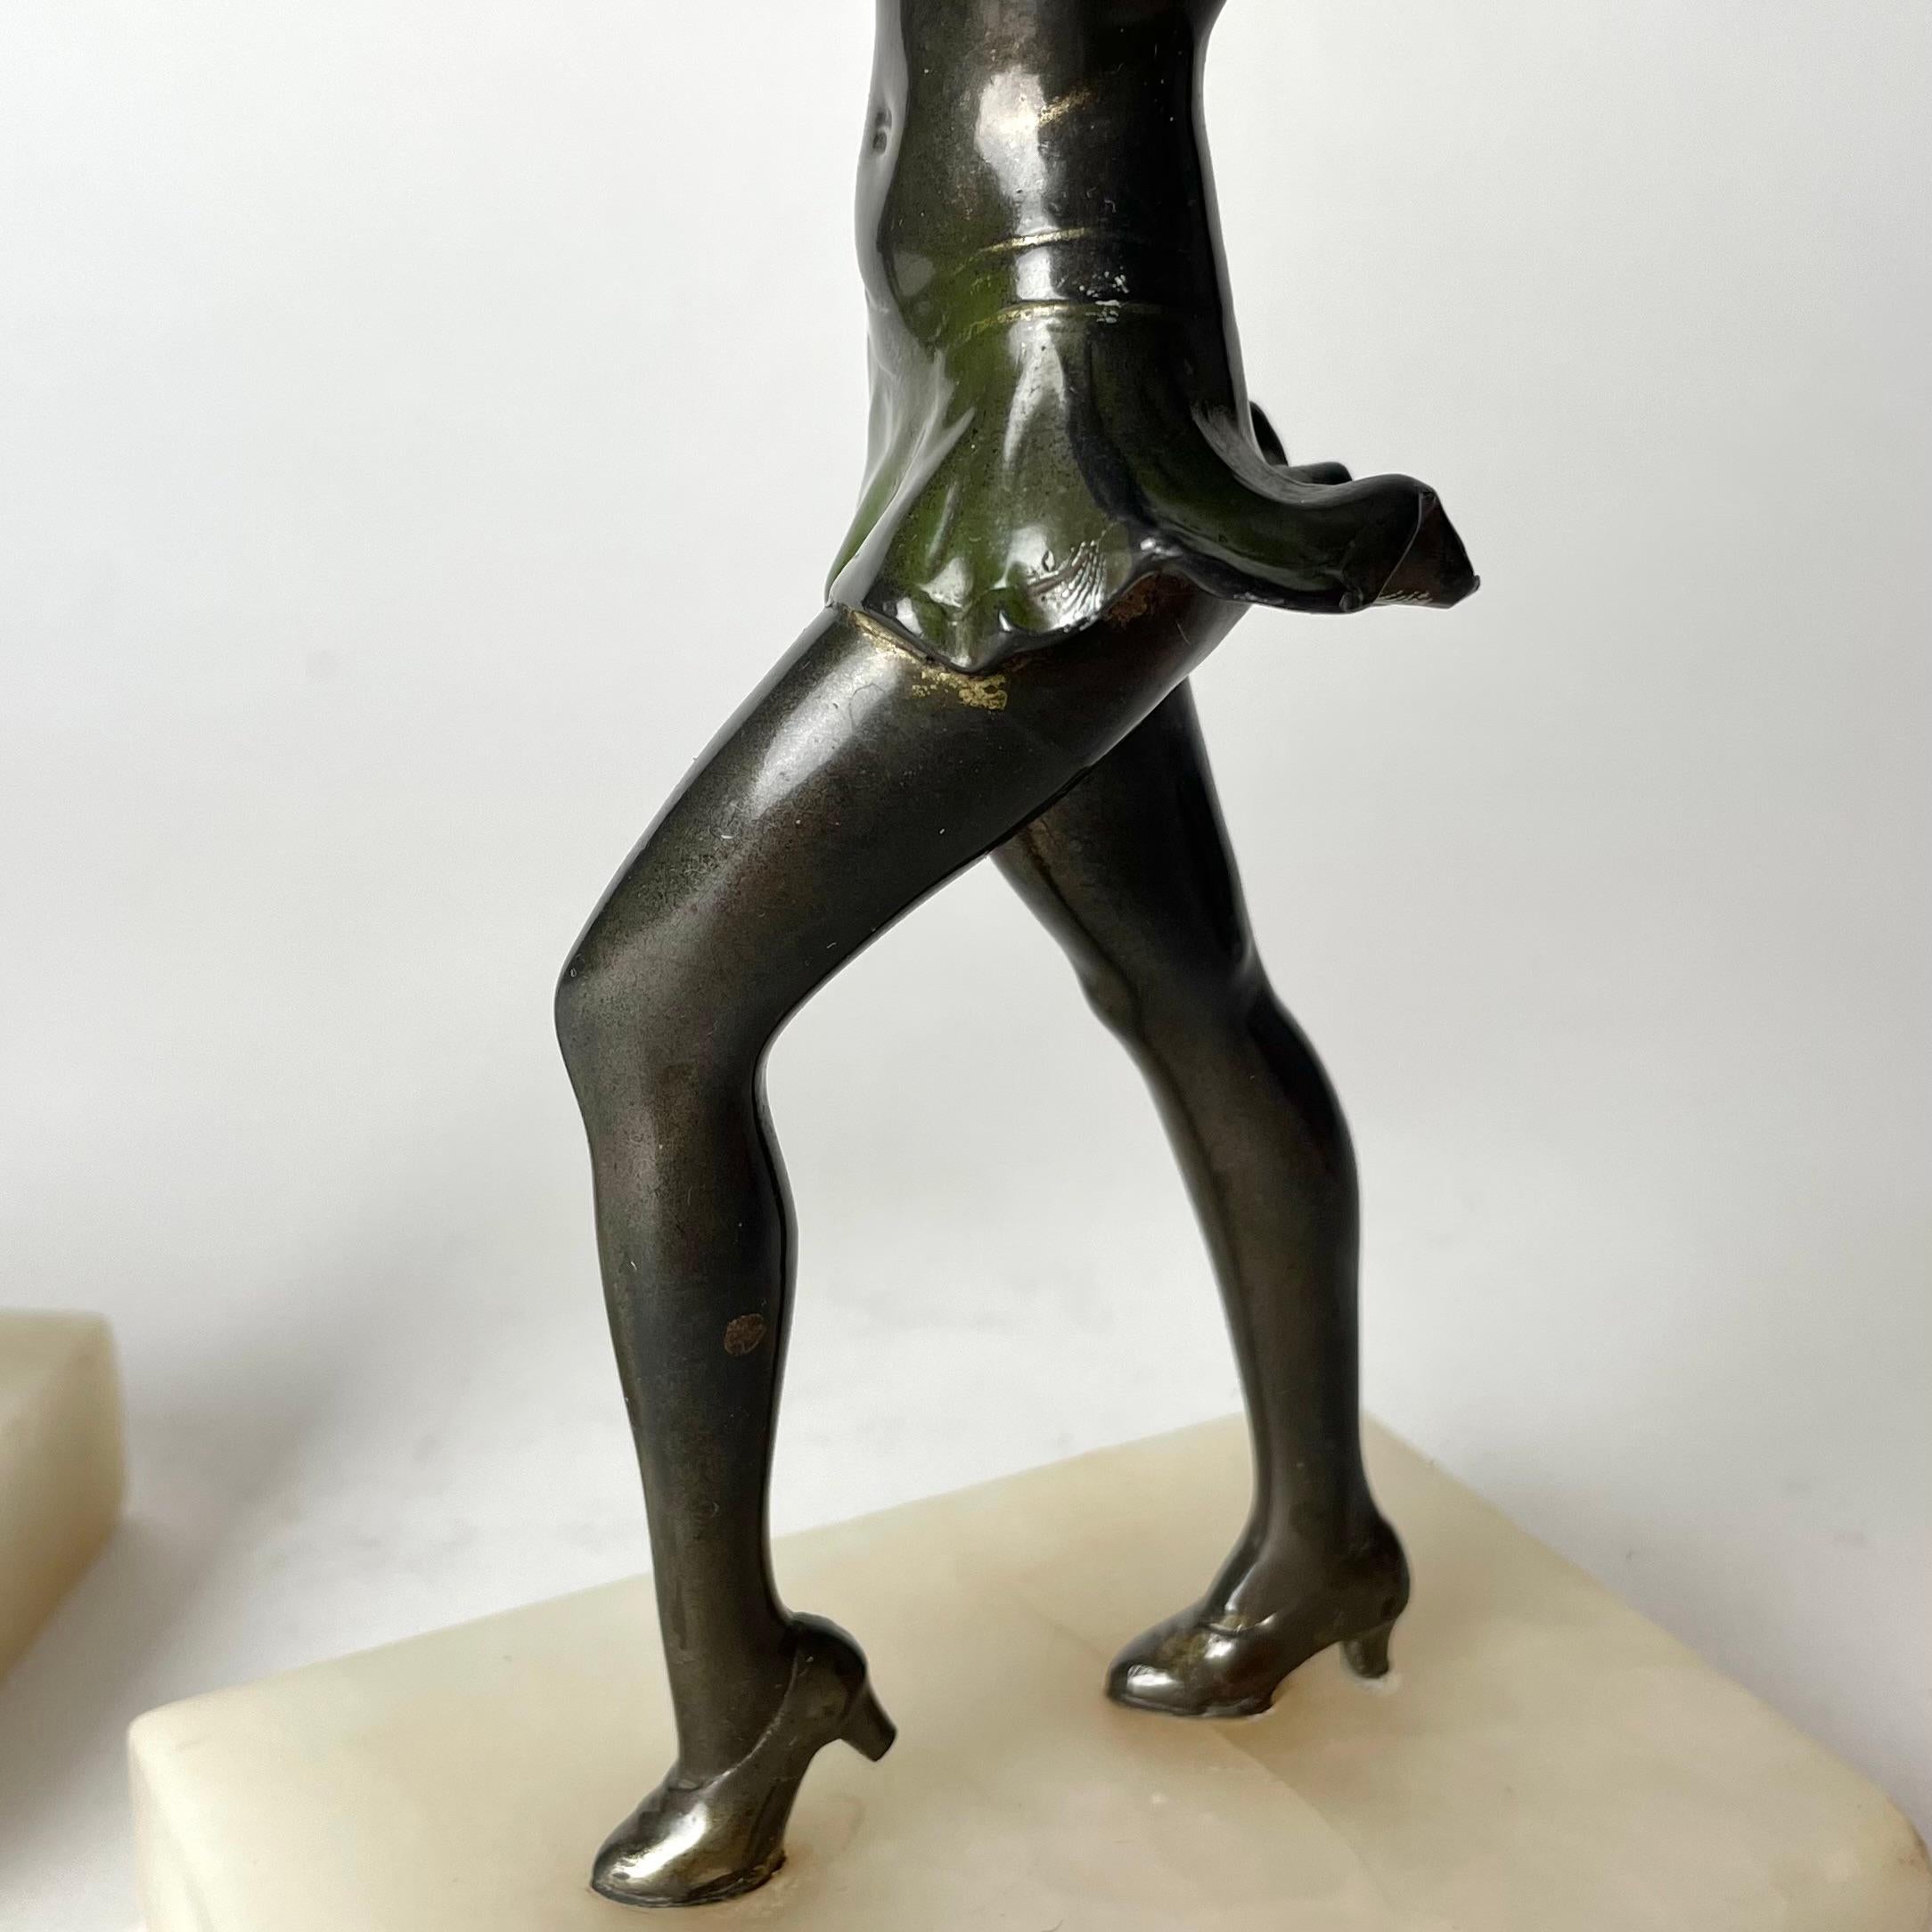 A pair of period Art Deco Bookends from 1920s-1930s with dancing women. 5